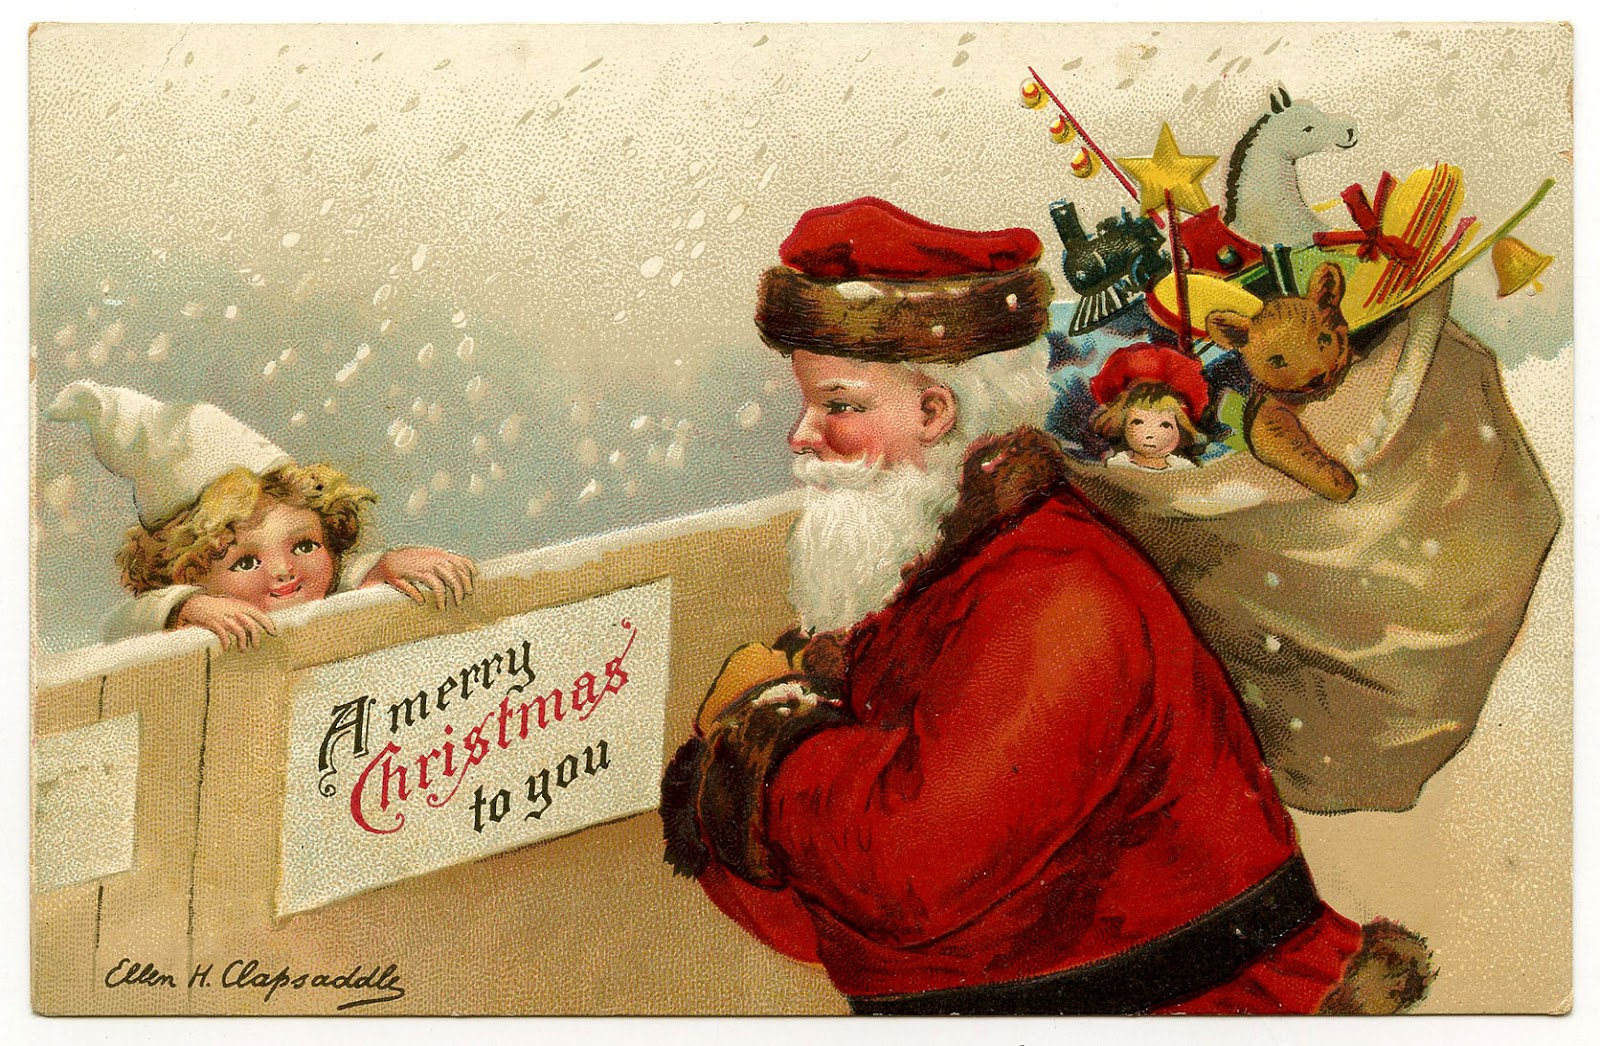 Antique Image - Santa in Snow with cute Child - The Graphics Fairy